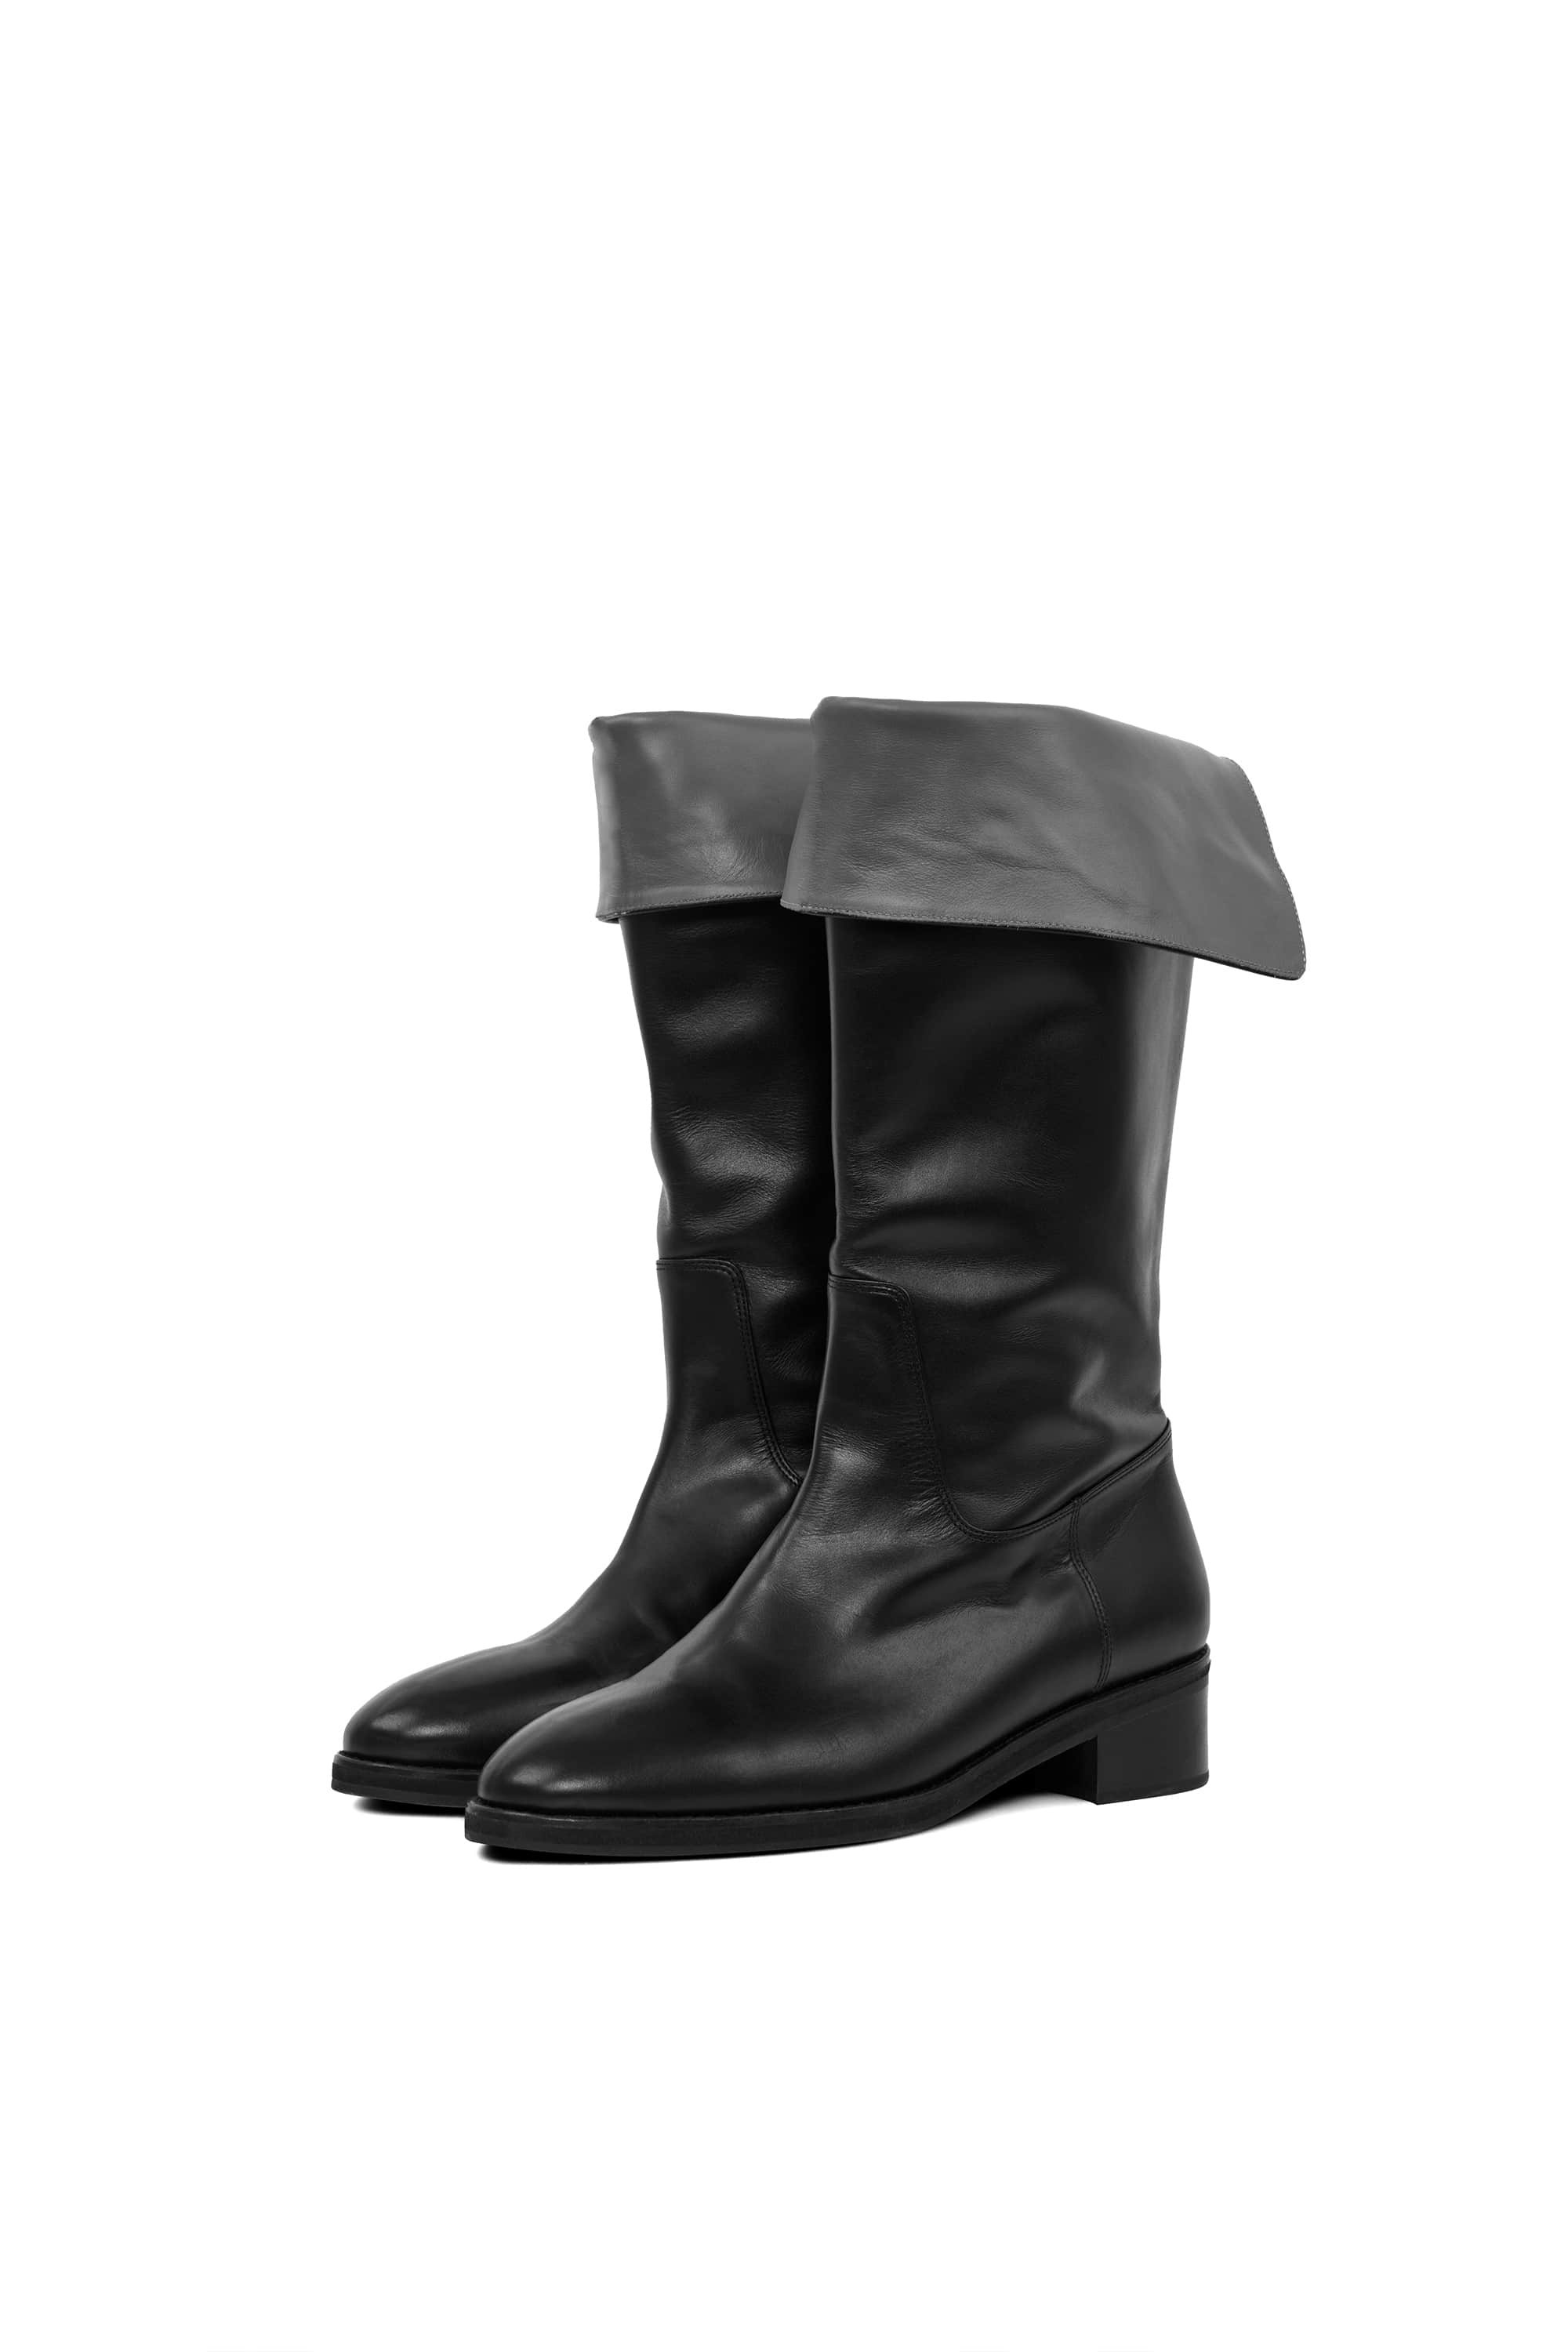 WEATHER FOLDED BOOTS_BLACK/GRAY